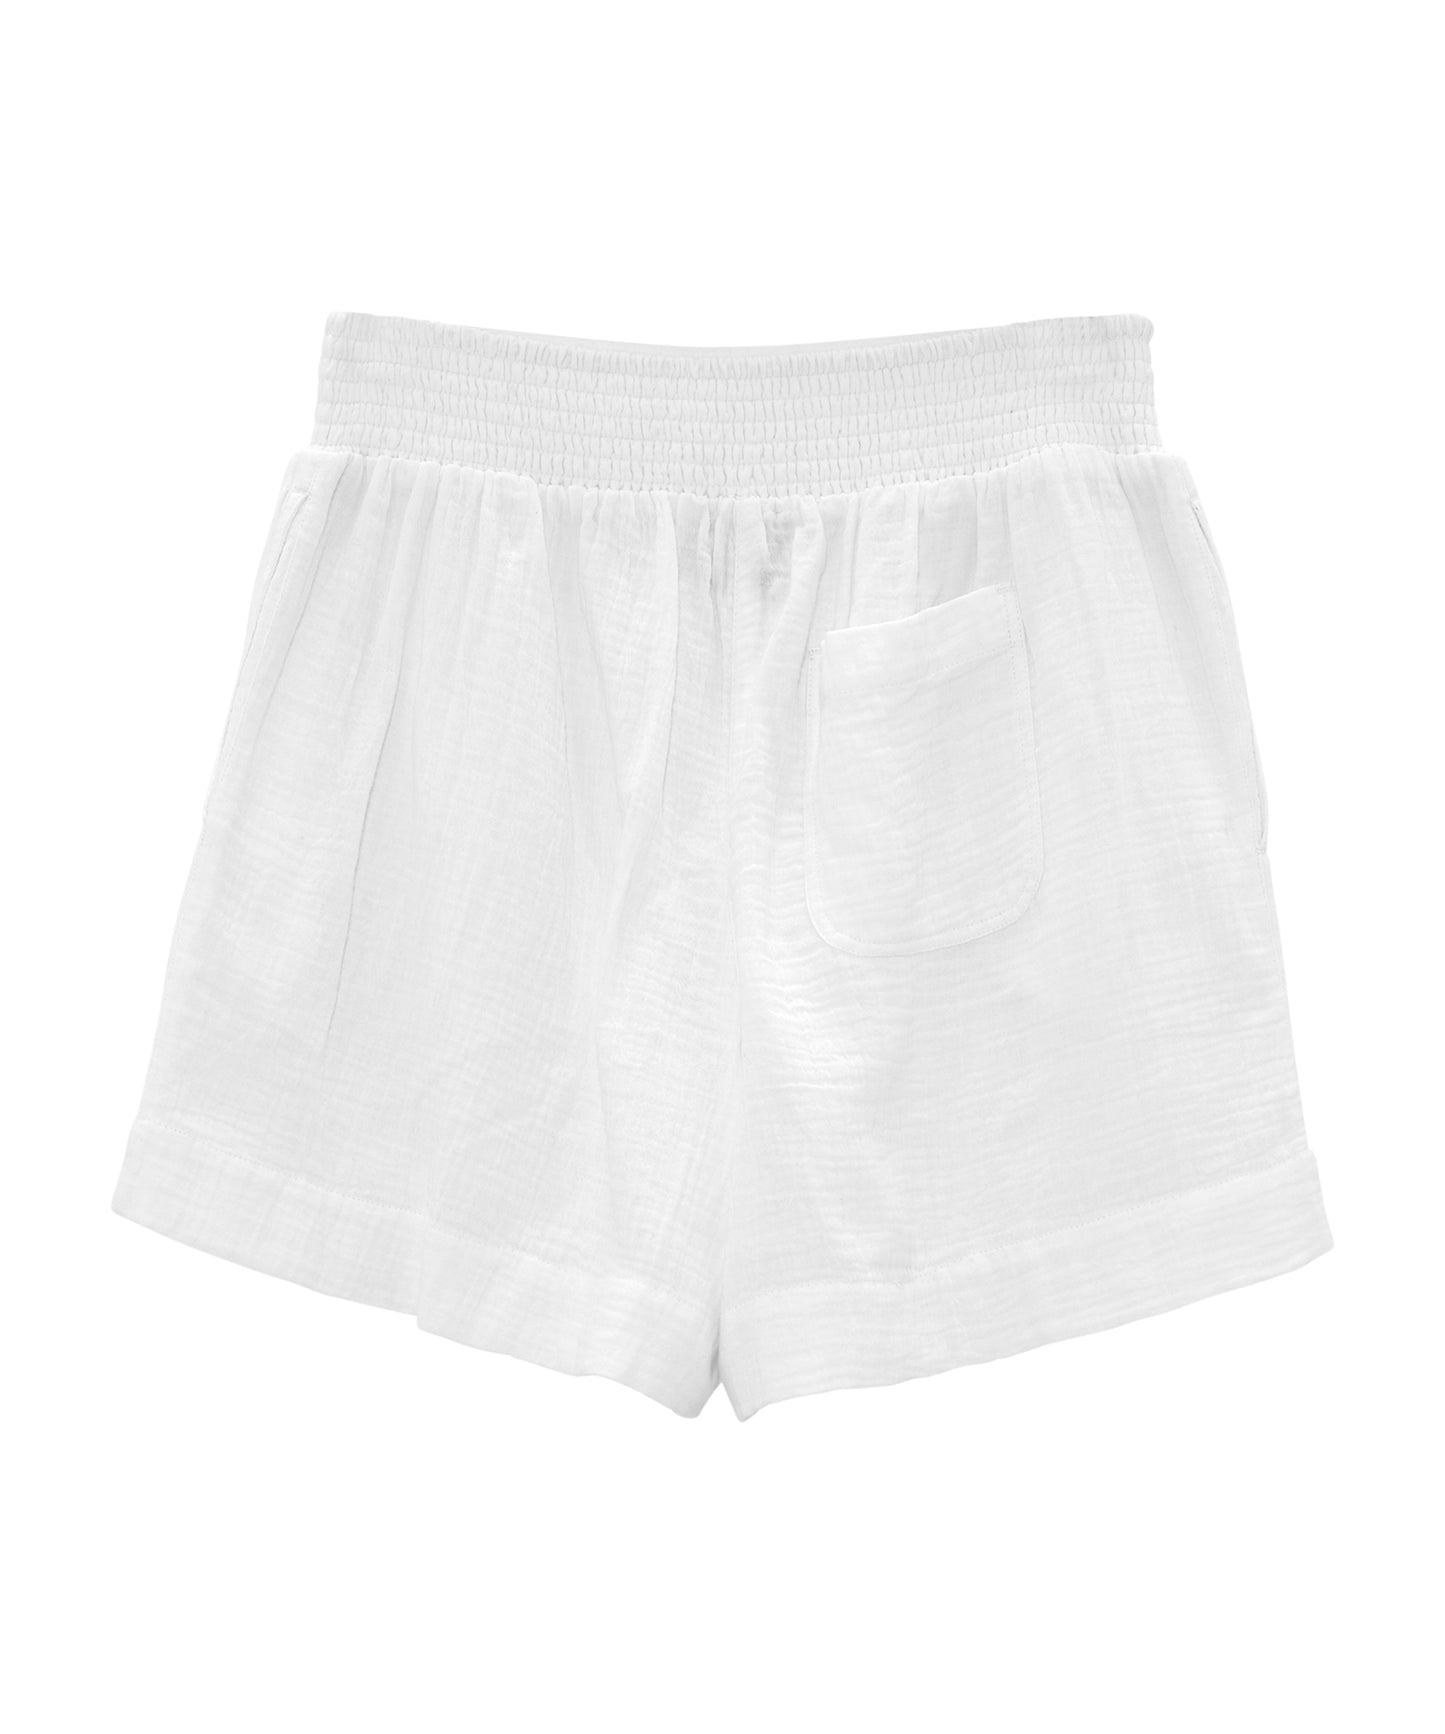 Supersoft Gauze Smocked Shorts in color white - back of shorts.